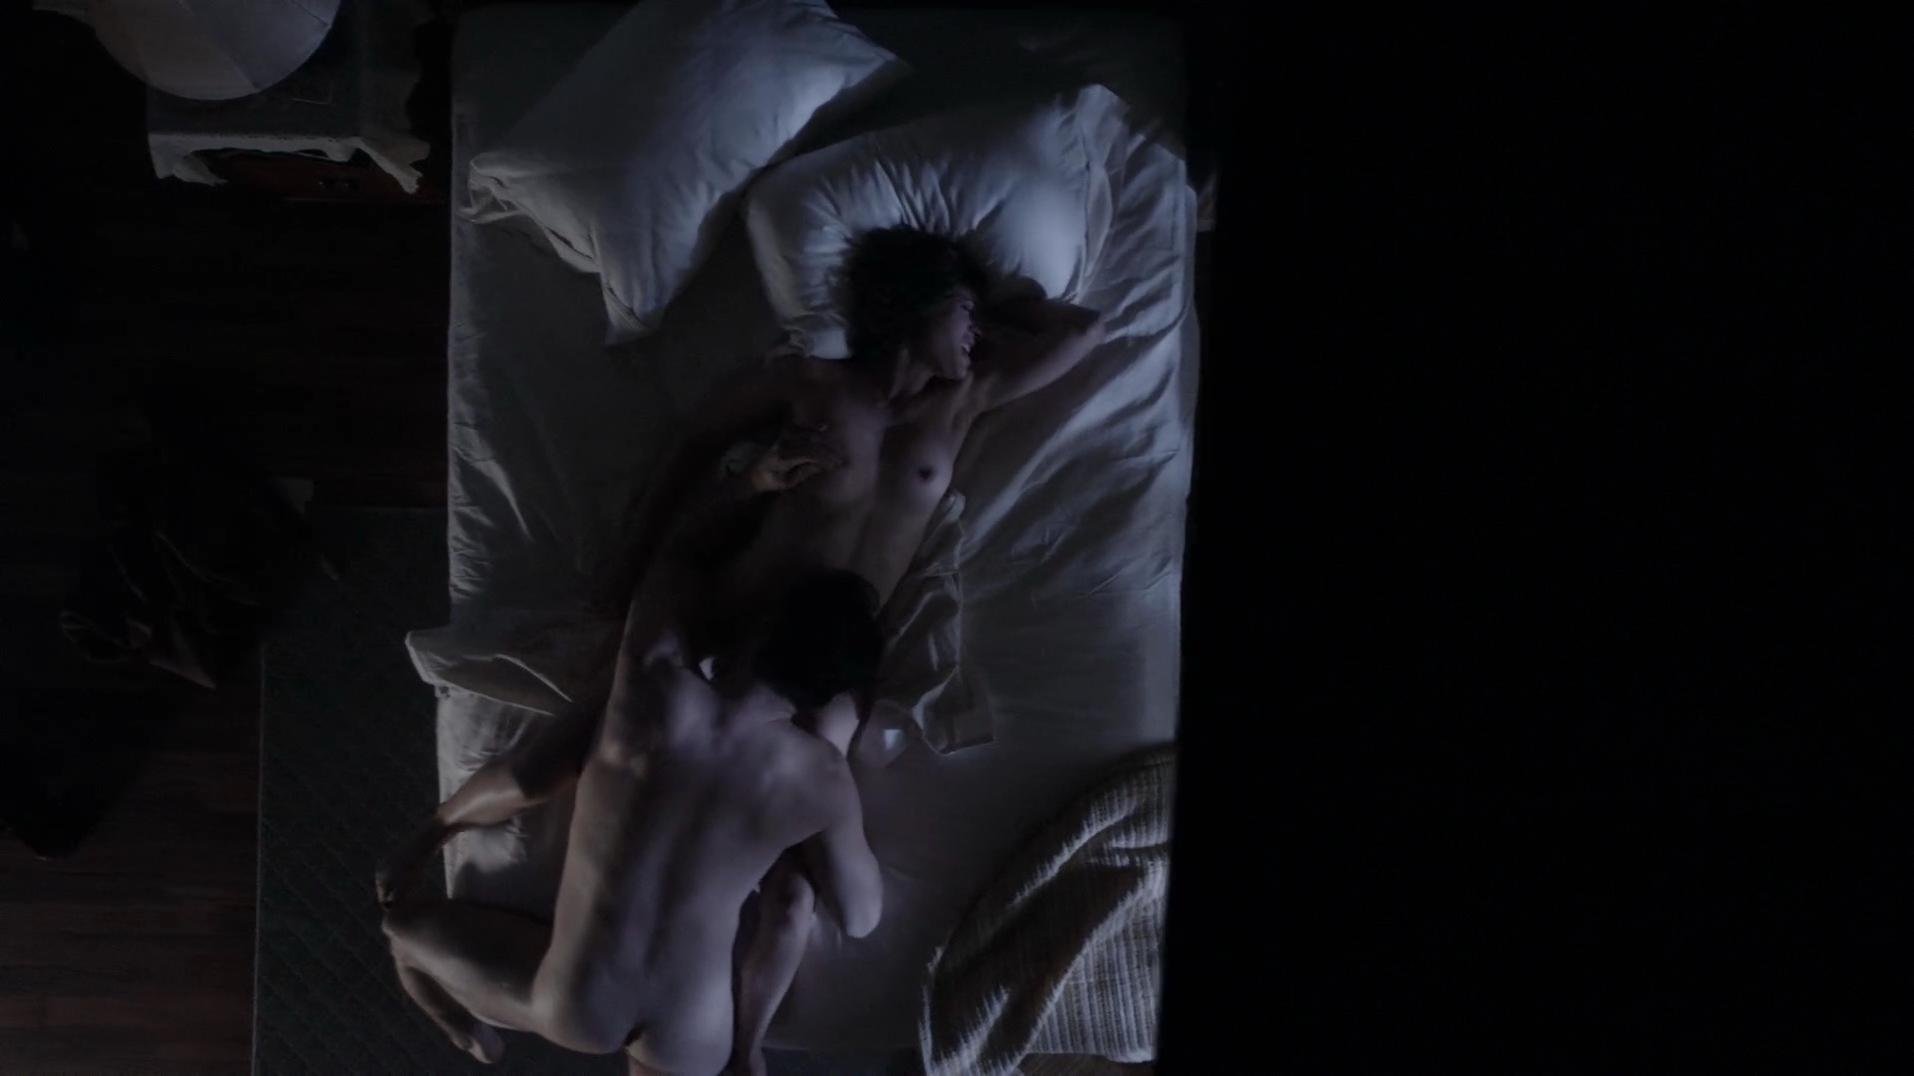 Lizzy Caplan nude, Rose McIver nude - Masters of Sex s01e04 (2013)